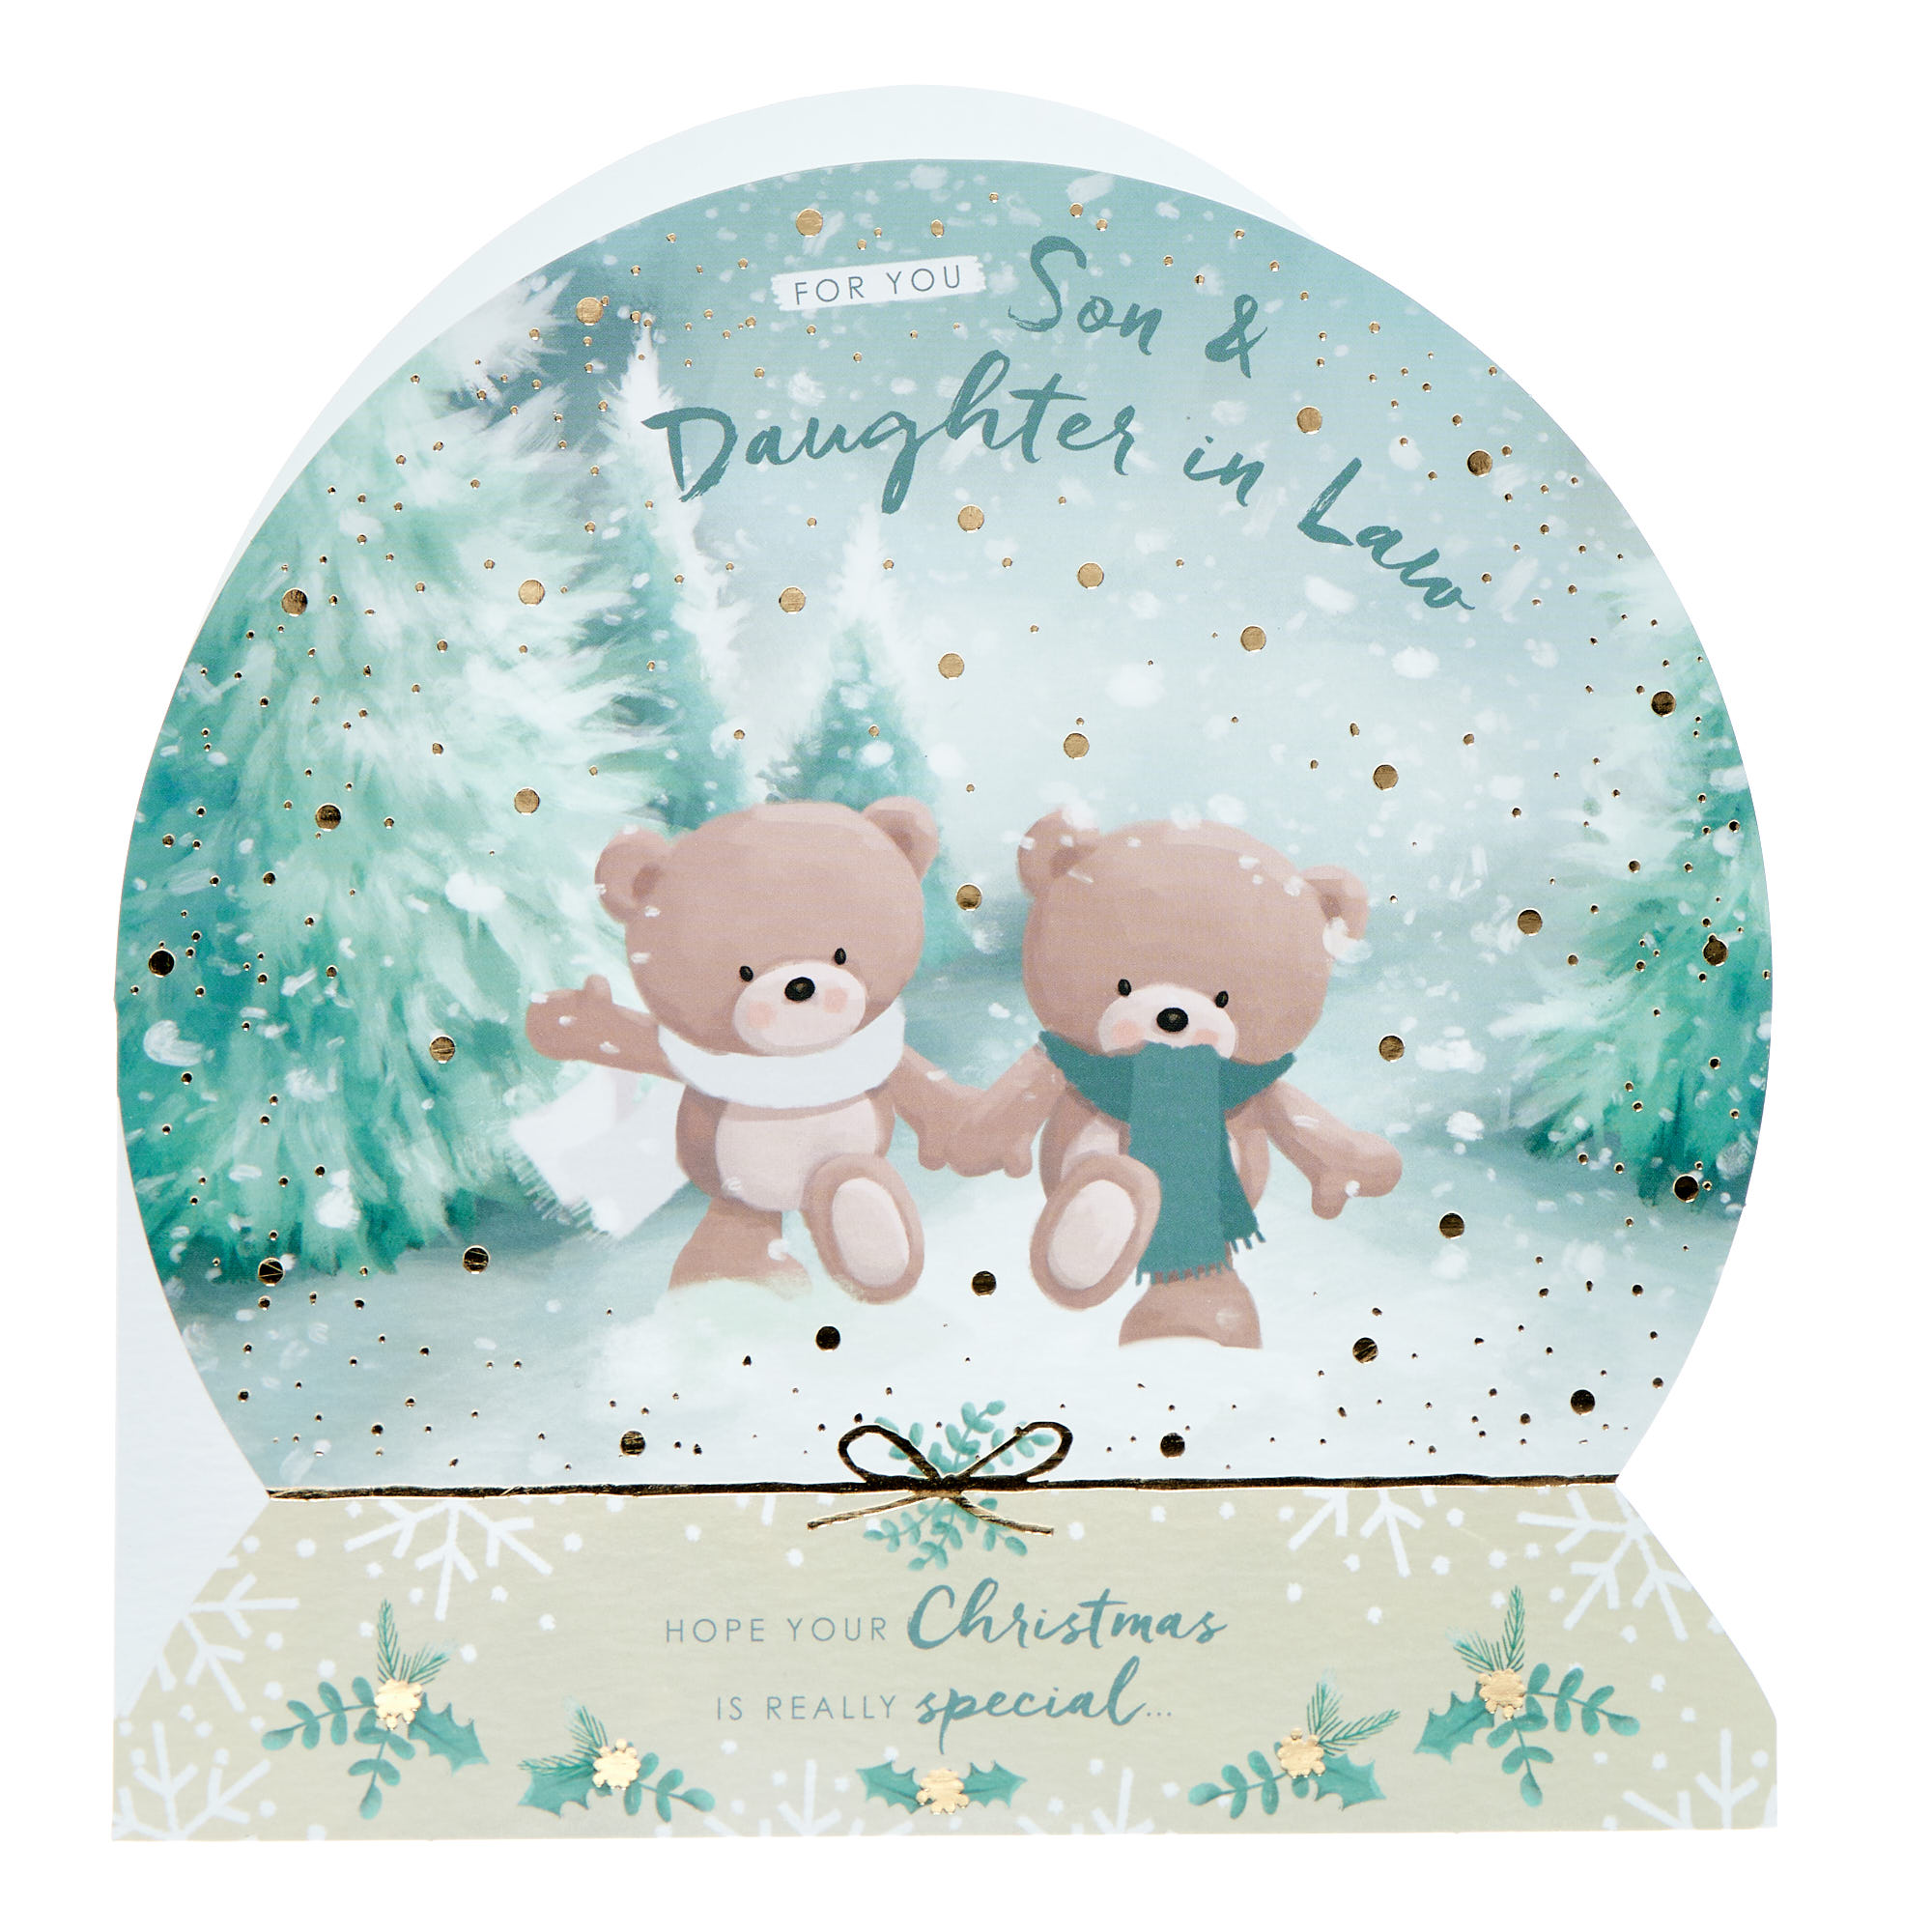 Son & Daughter In Law Hugs Snowglobe Christmas Card